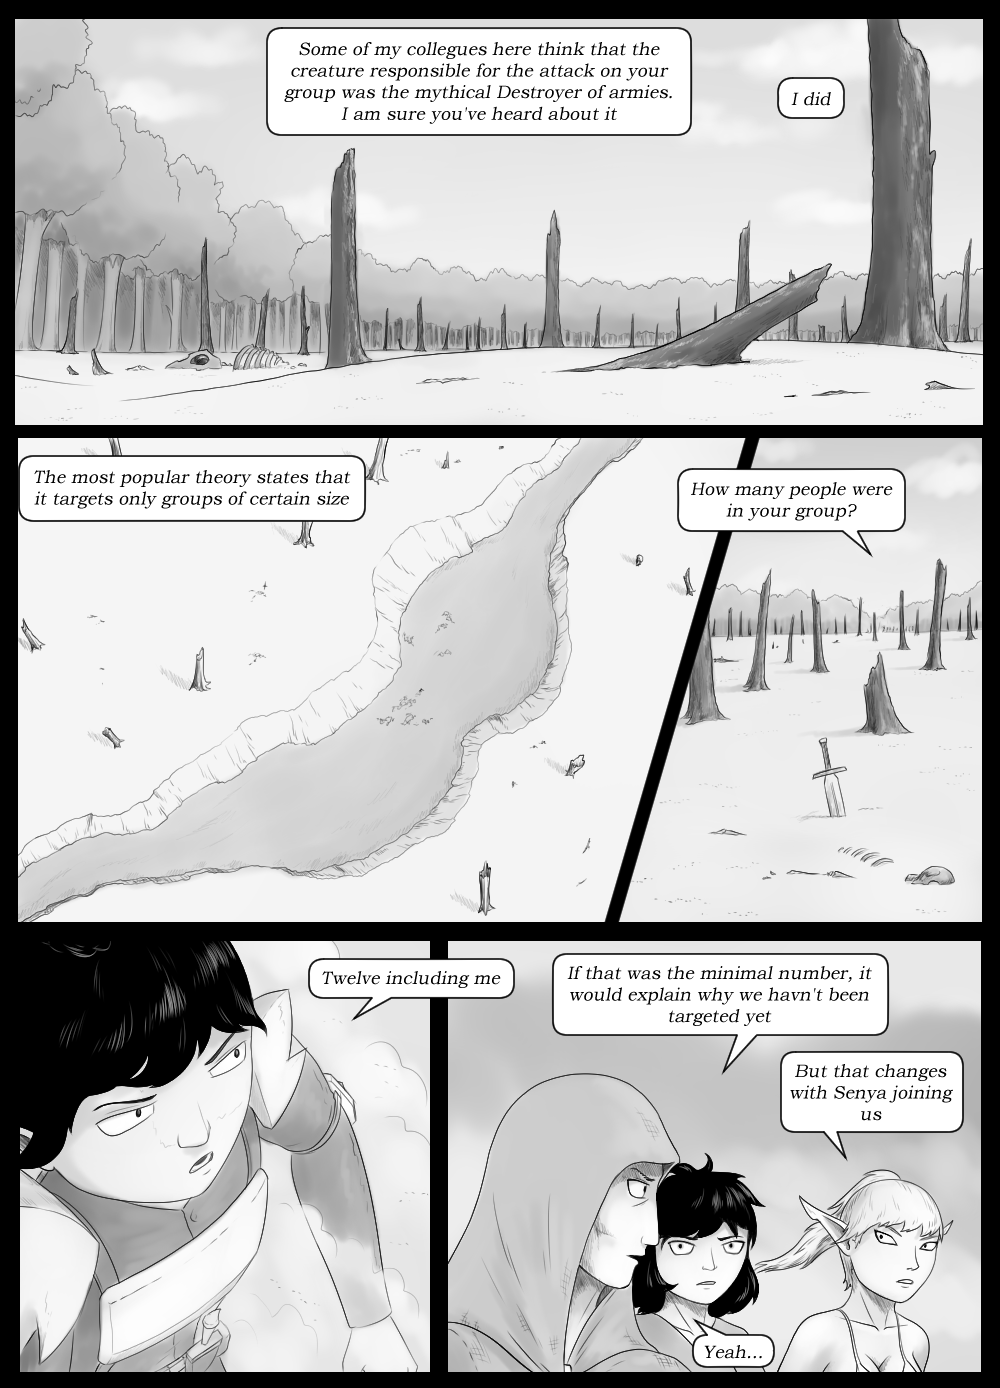 Page 17 - the Myth of the Destroyer of armies